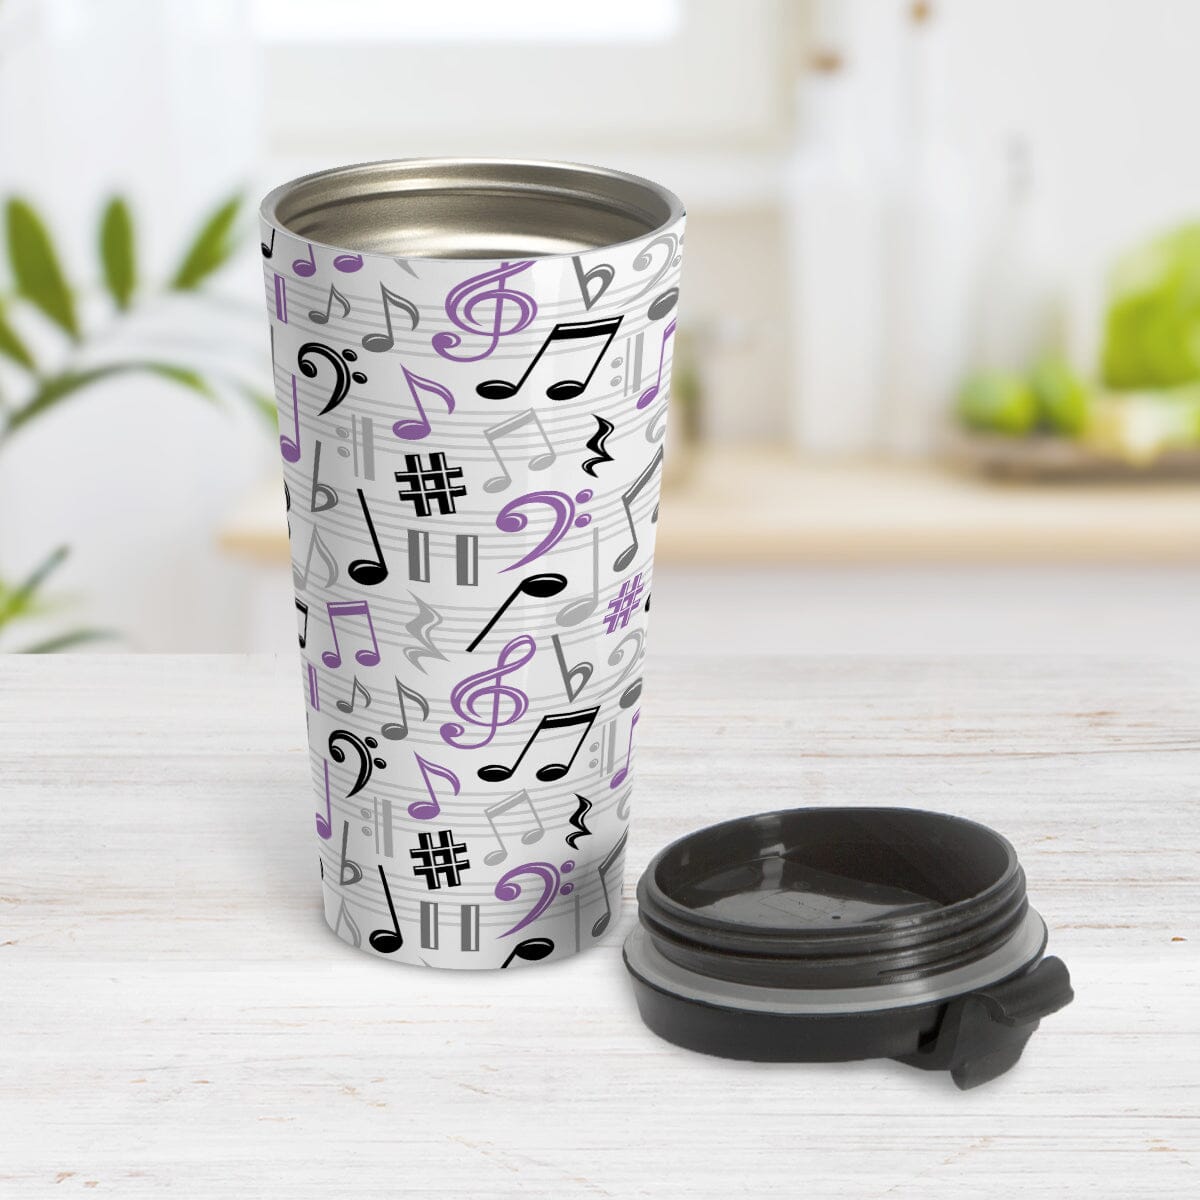 Purple Music Notes Pattern Travel Mug (15oz) at Amy's Coffee Mugs. A stainless steel travel mug designed with music notes and symbols in purple, black, and gray in a pattern that wraps around the travel mug. Image shows the travel mug open with the lid laying beside it on a tabletop.